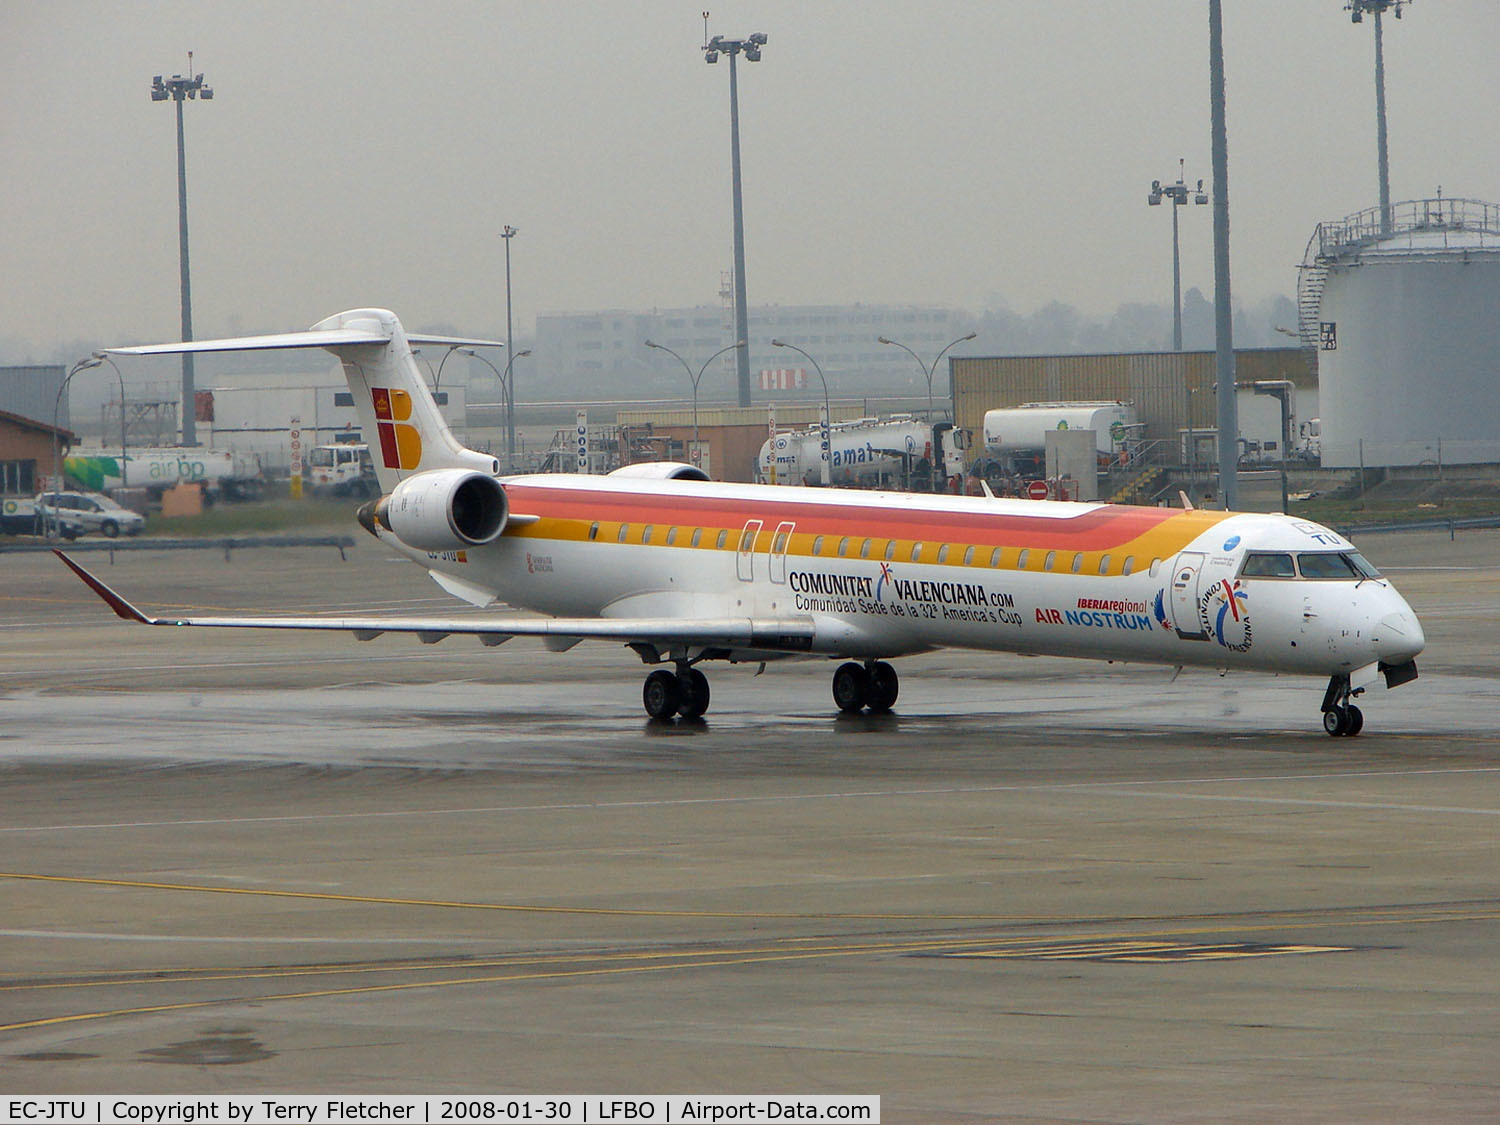 EC-JTU, 2006 Bombardier CRJ-900 (CL-600-2D24) C/N 15079, Air Nostrum CLRJ900 about to depart the ramp at Toulouse